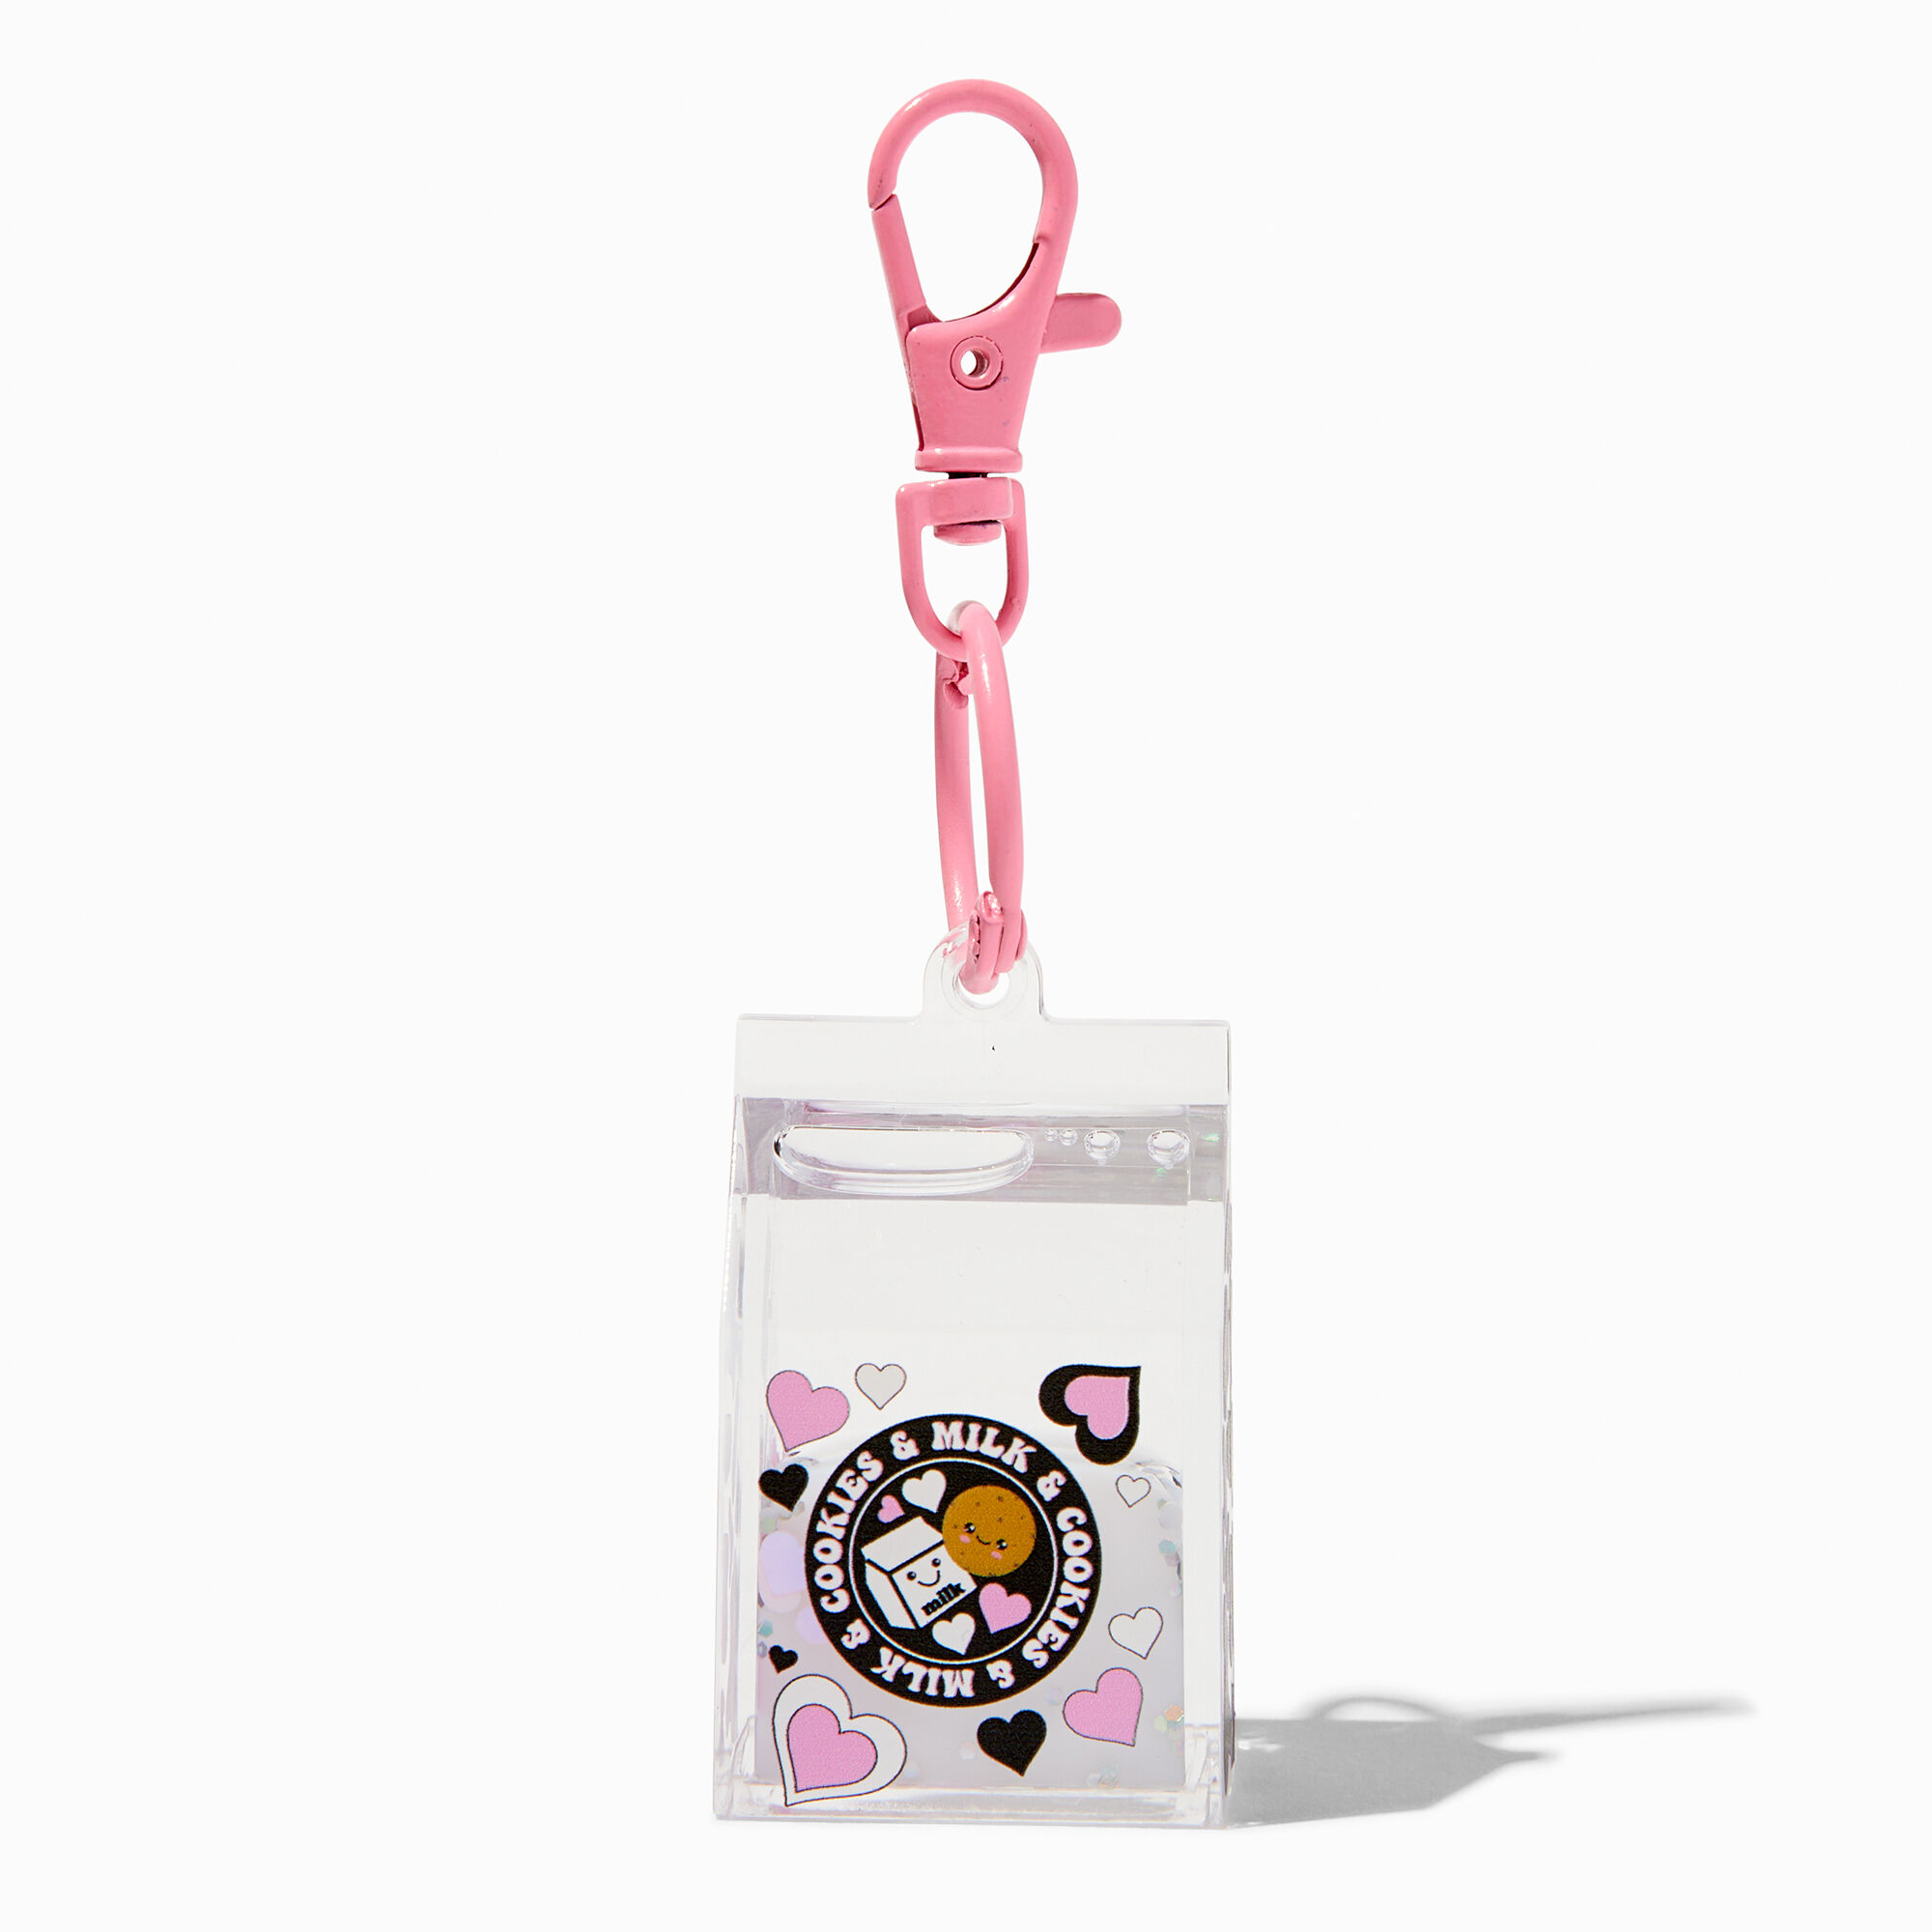 View Claires Milk Cookies Carton WaterFilled Glitter Keyring information